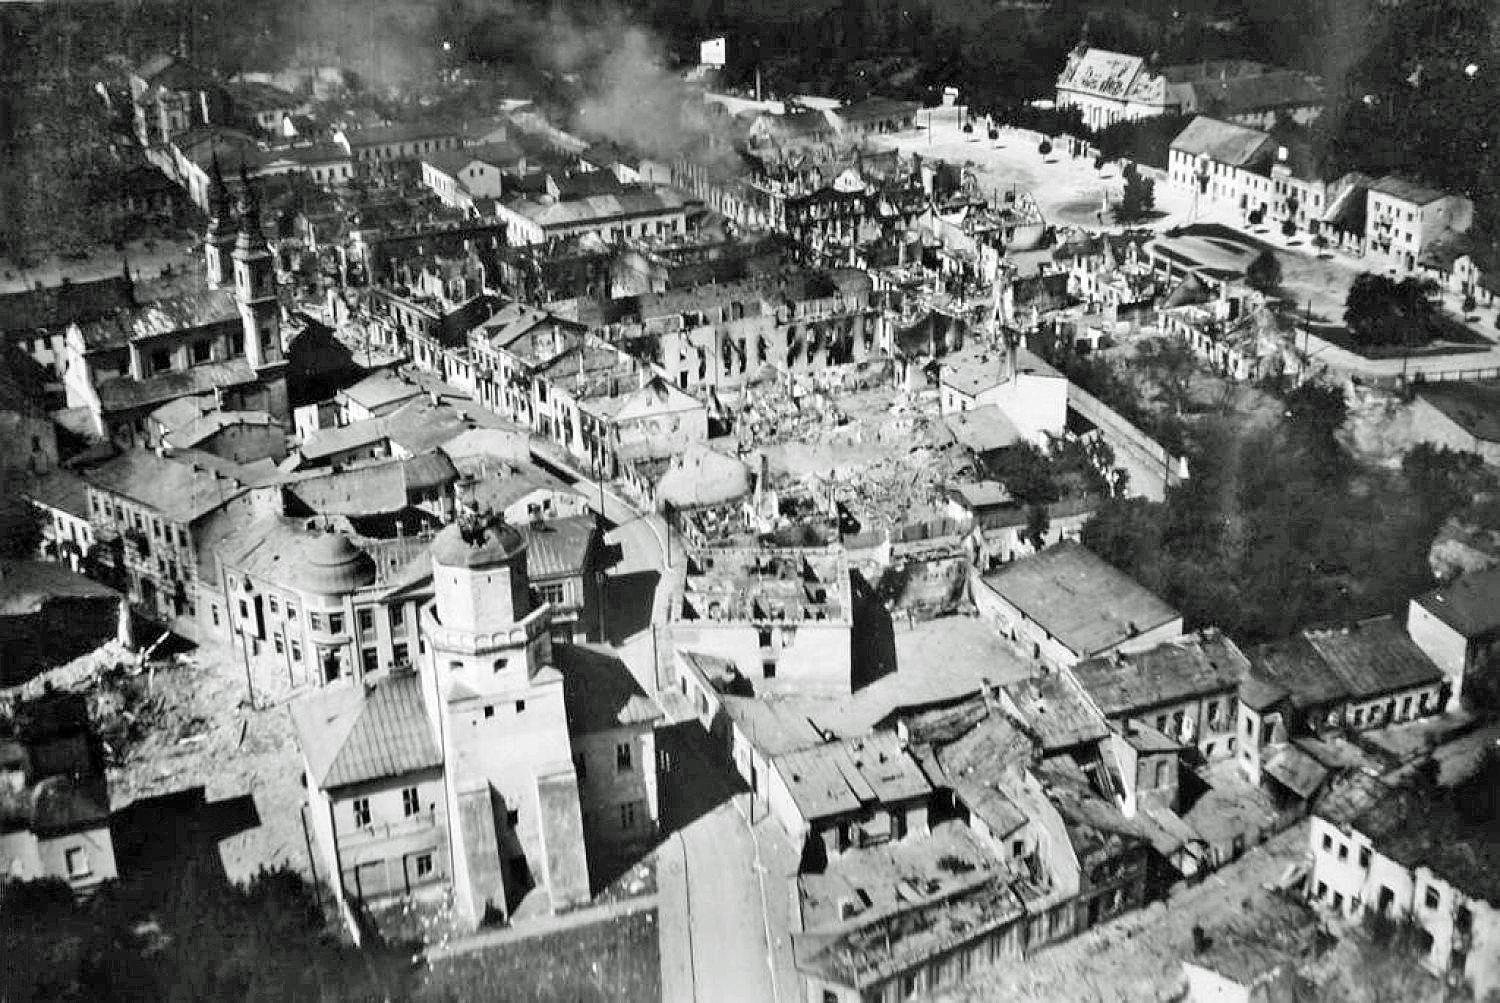 A photograph of the Polish city Wielun after the German bombardment during the Second World War.